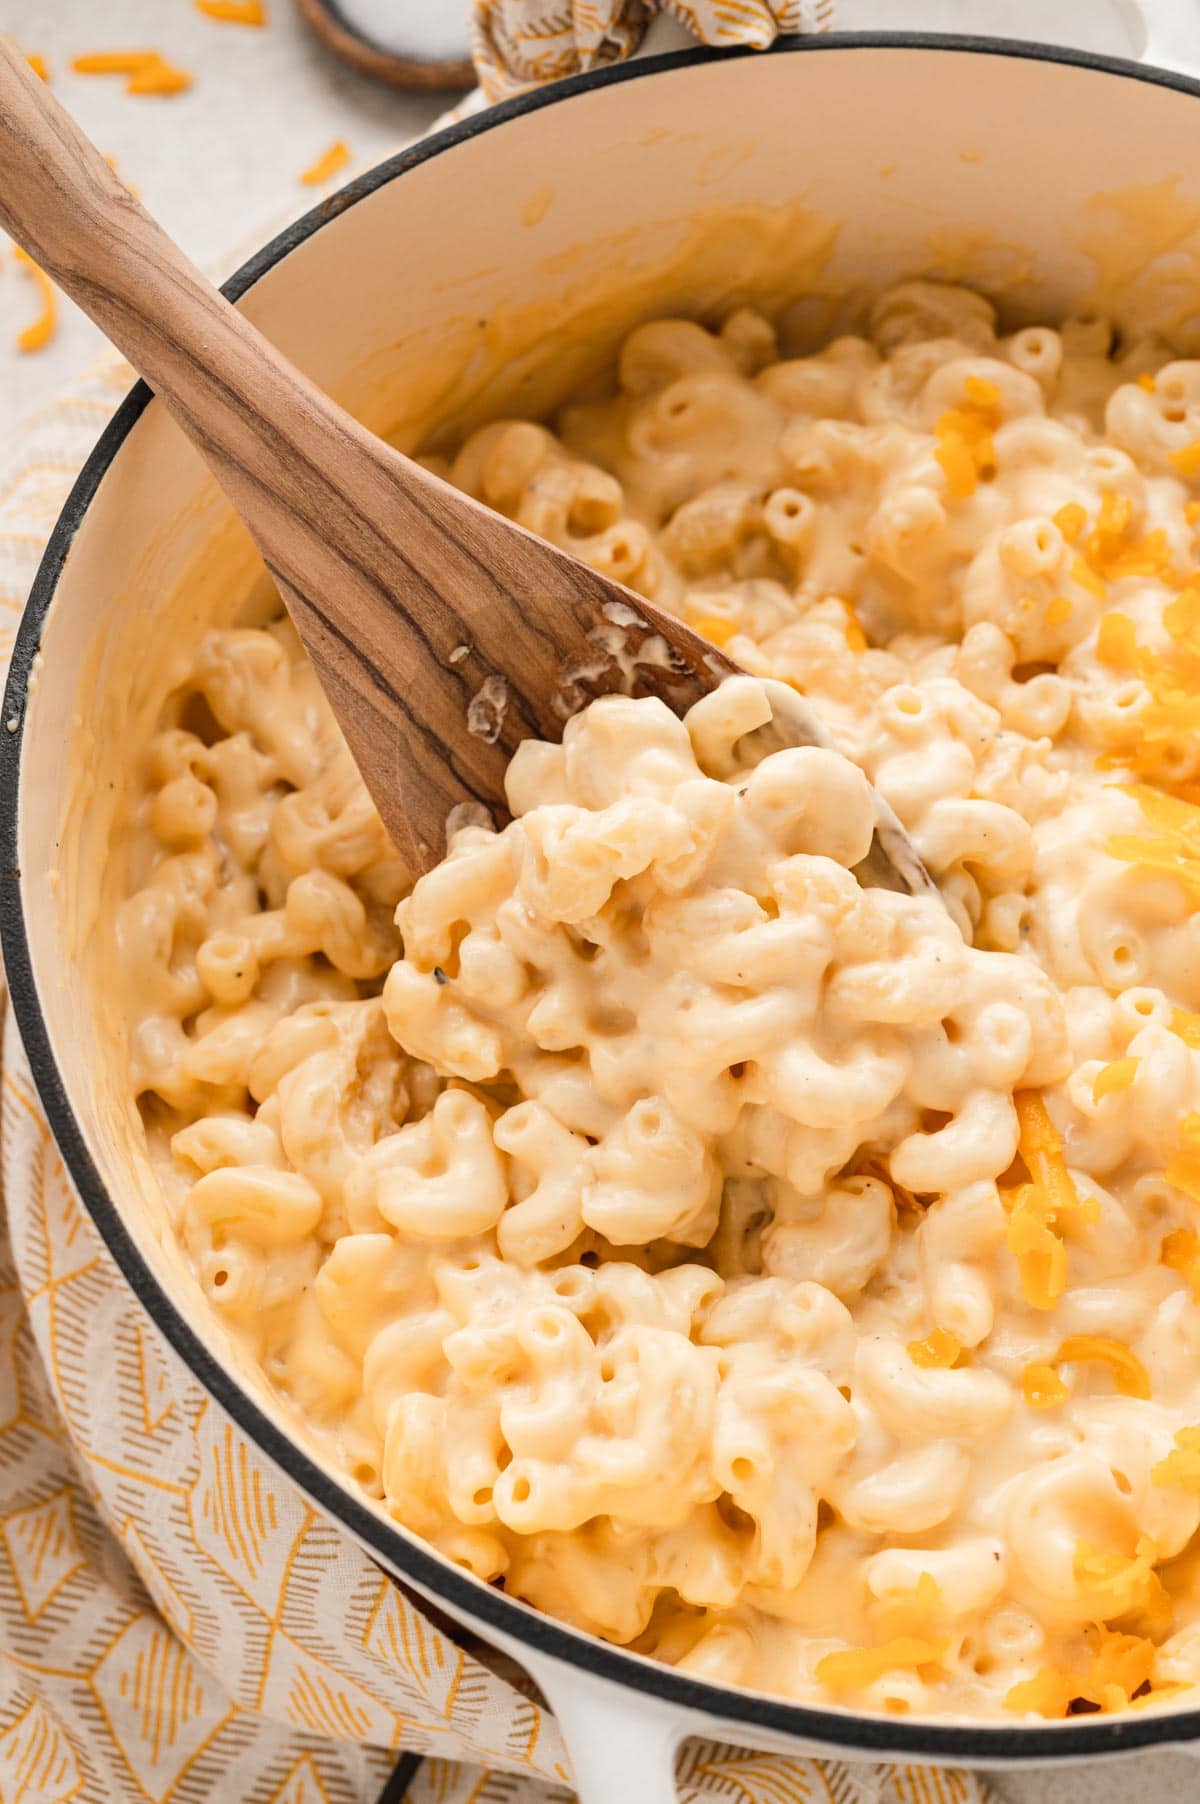 Stovetop Mac and Cheese - The Cozy Cook